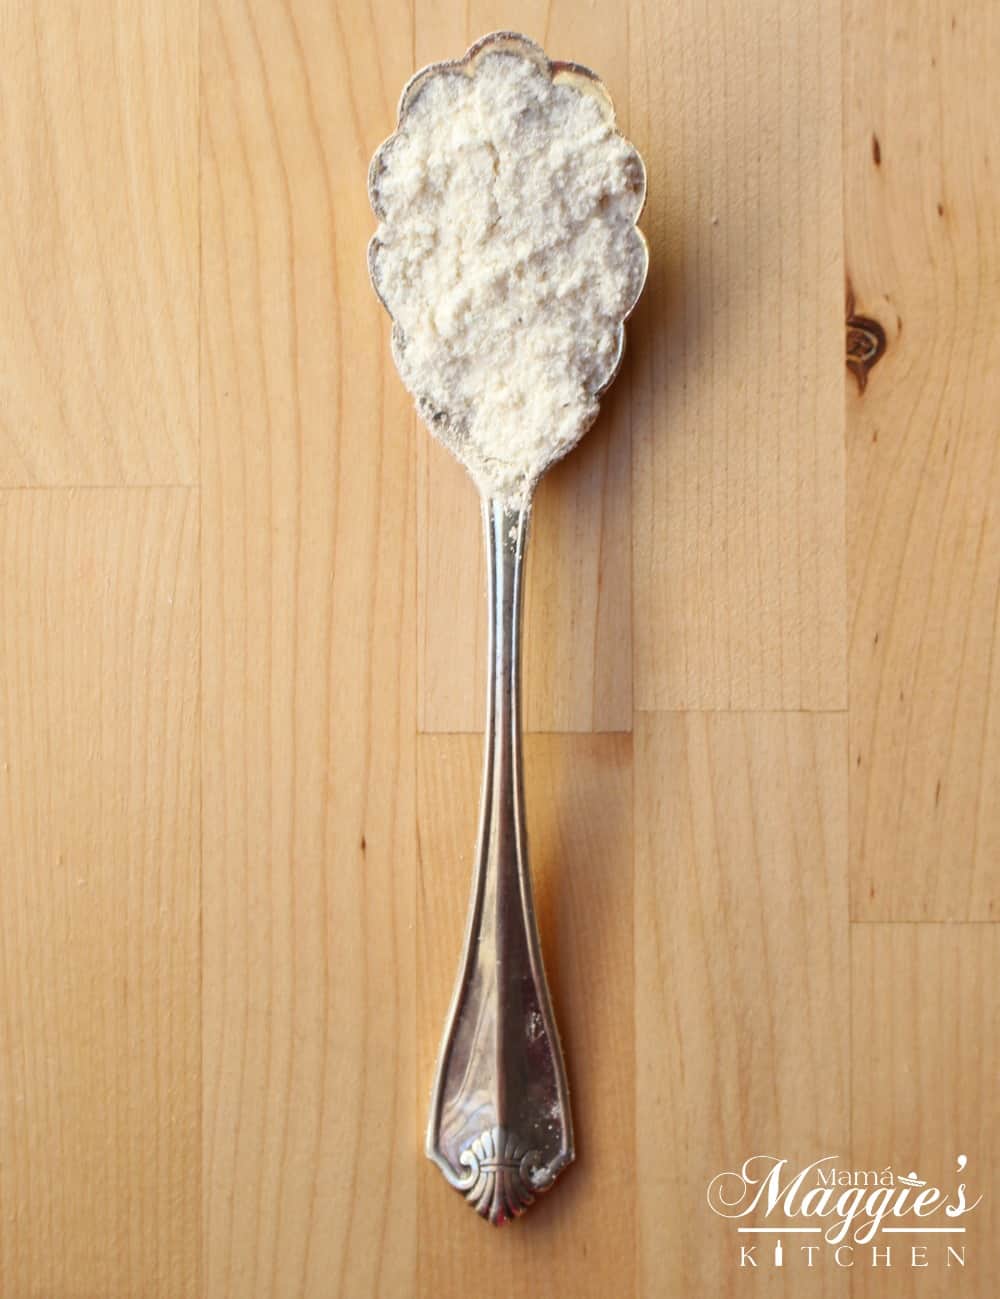 A spoon holding masa harina on a wooden surface.